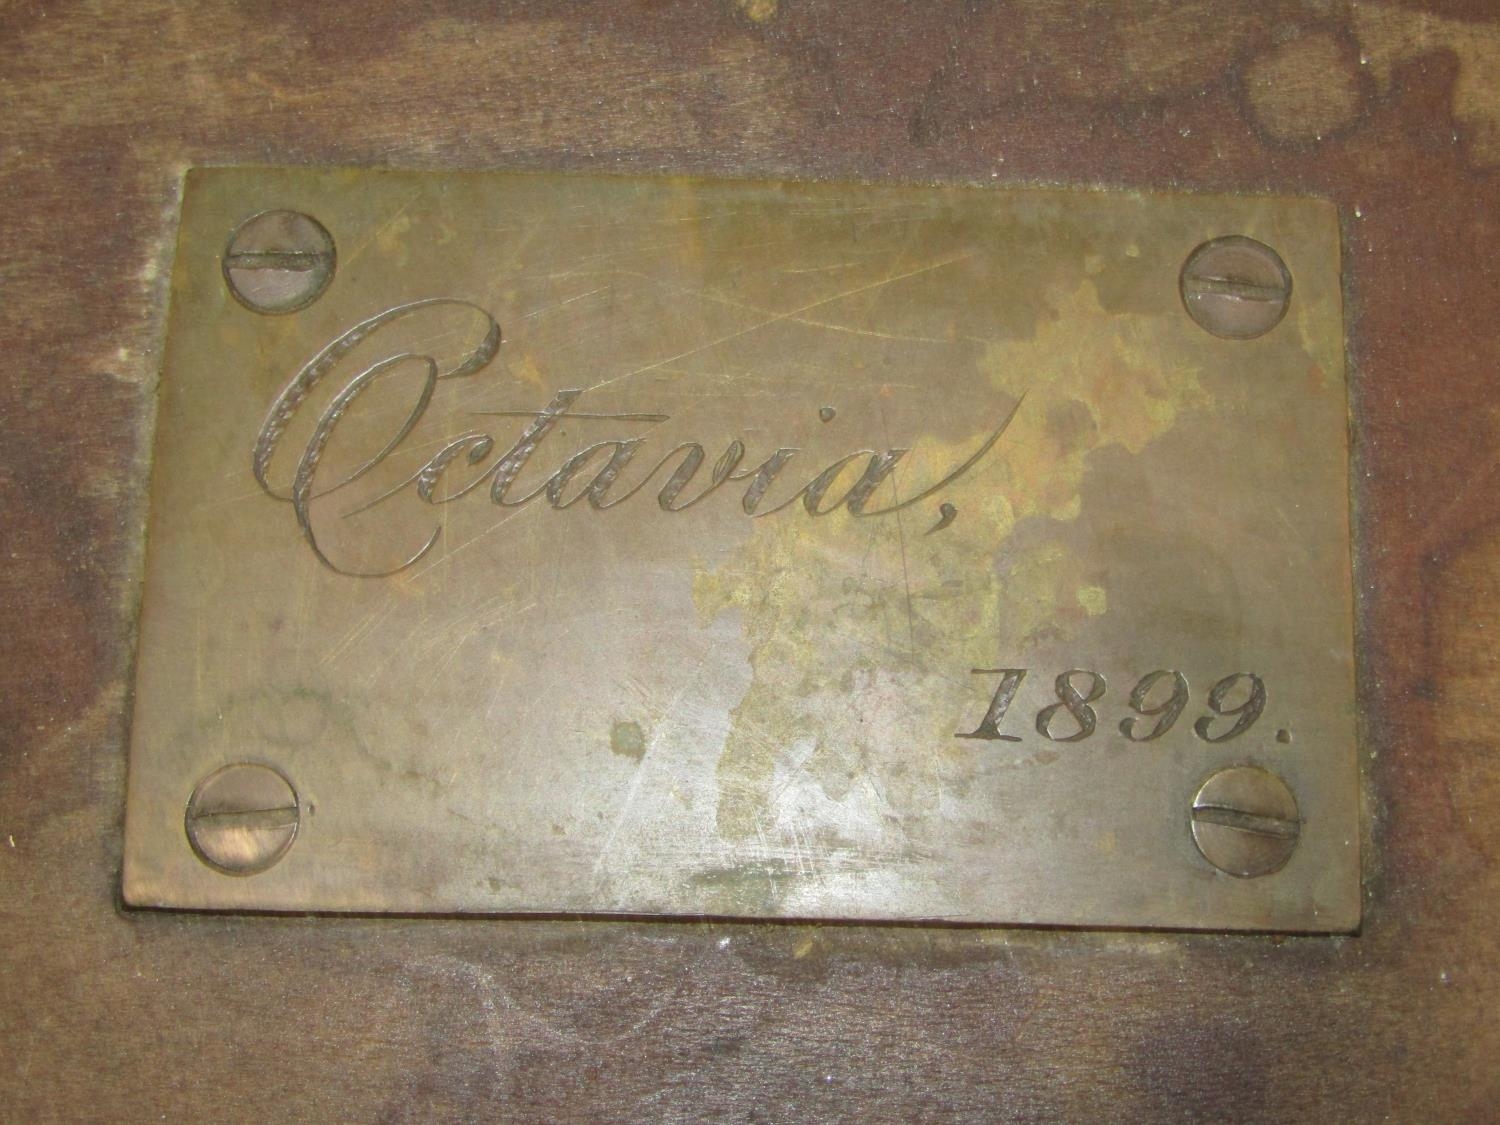 A hardwood travelling box with steel banded borders, the brass plate - Octavia 1899 - Image 3 of 5